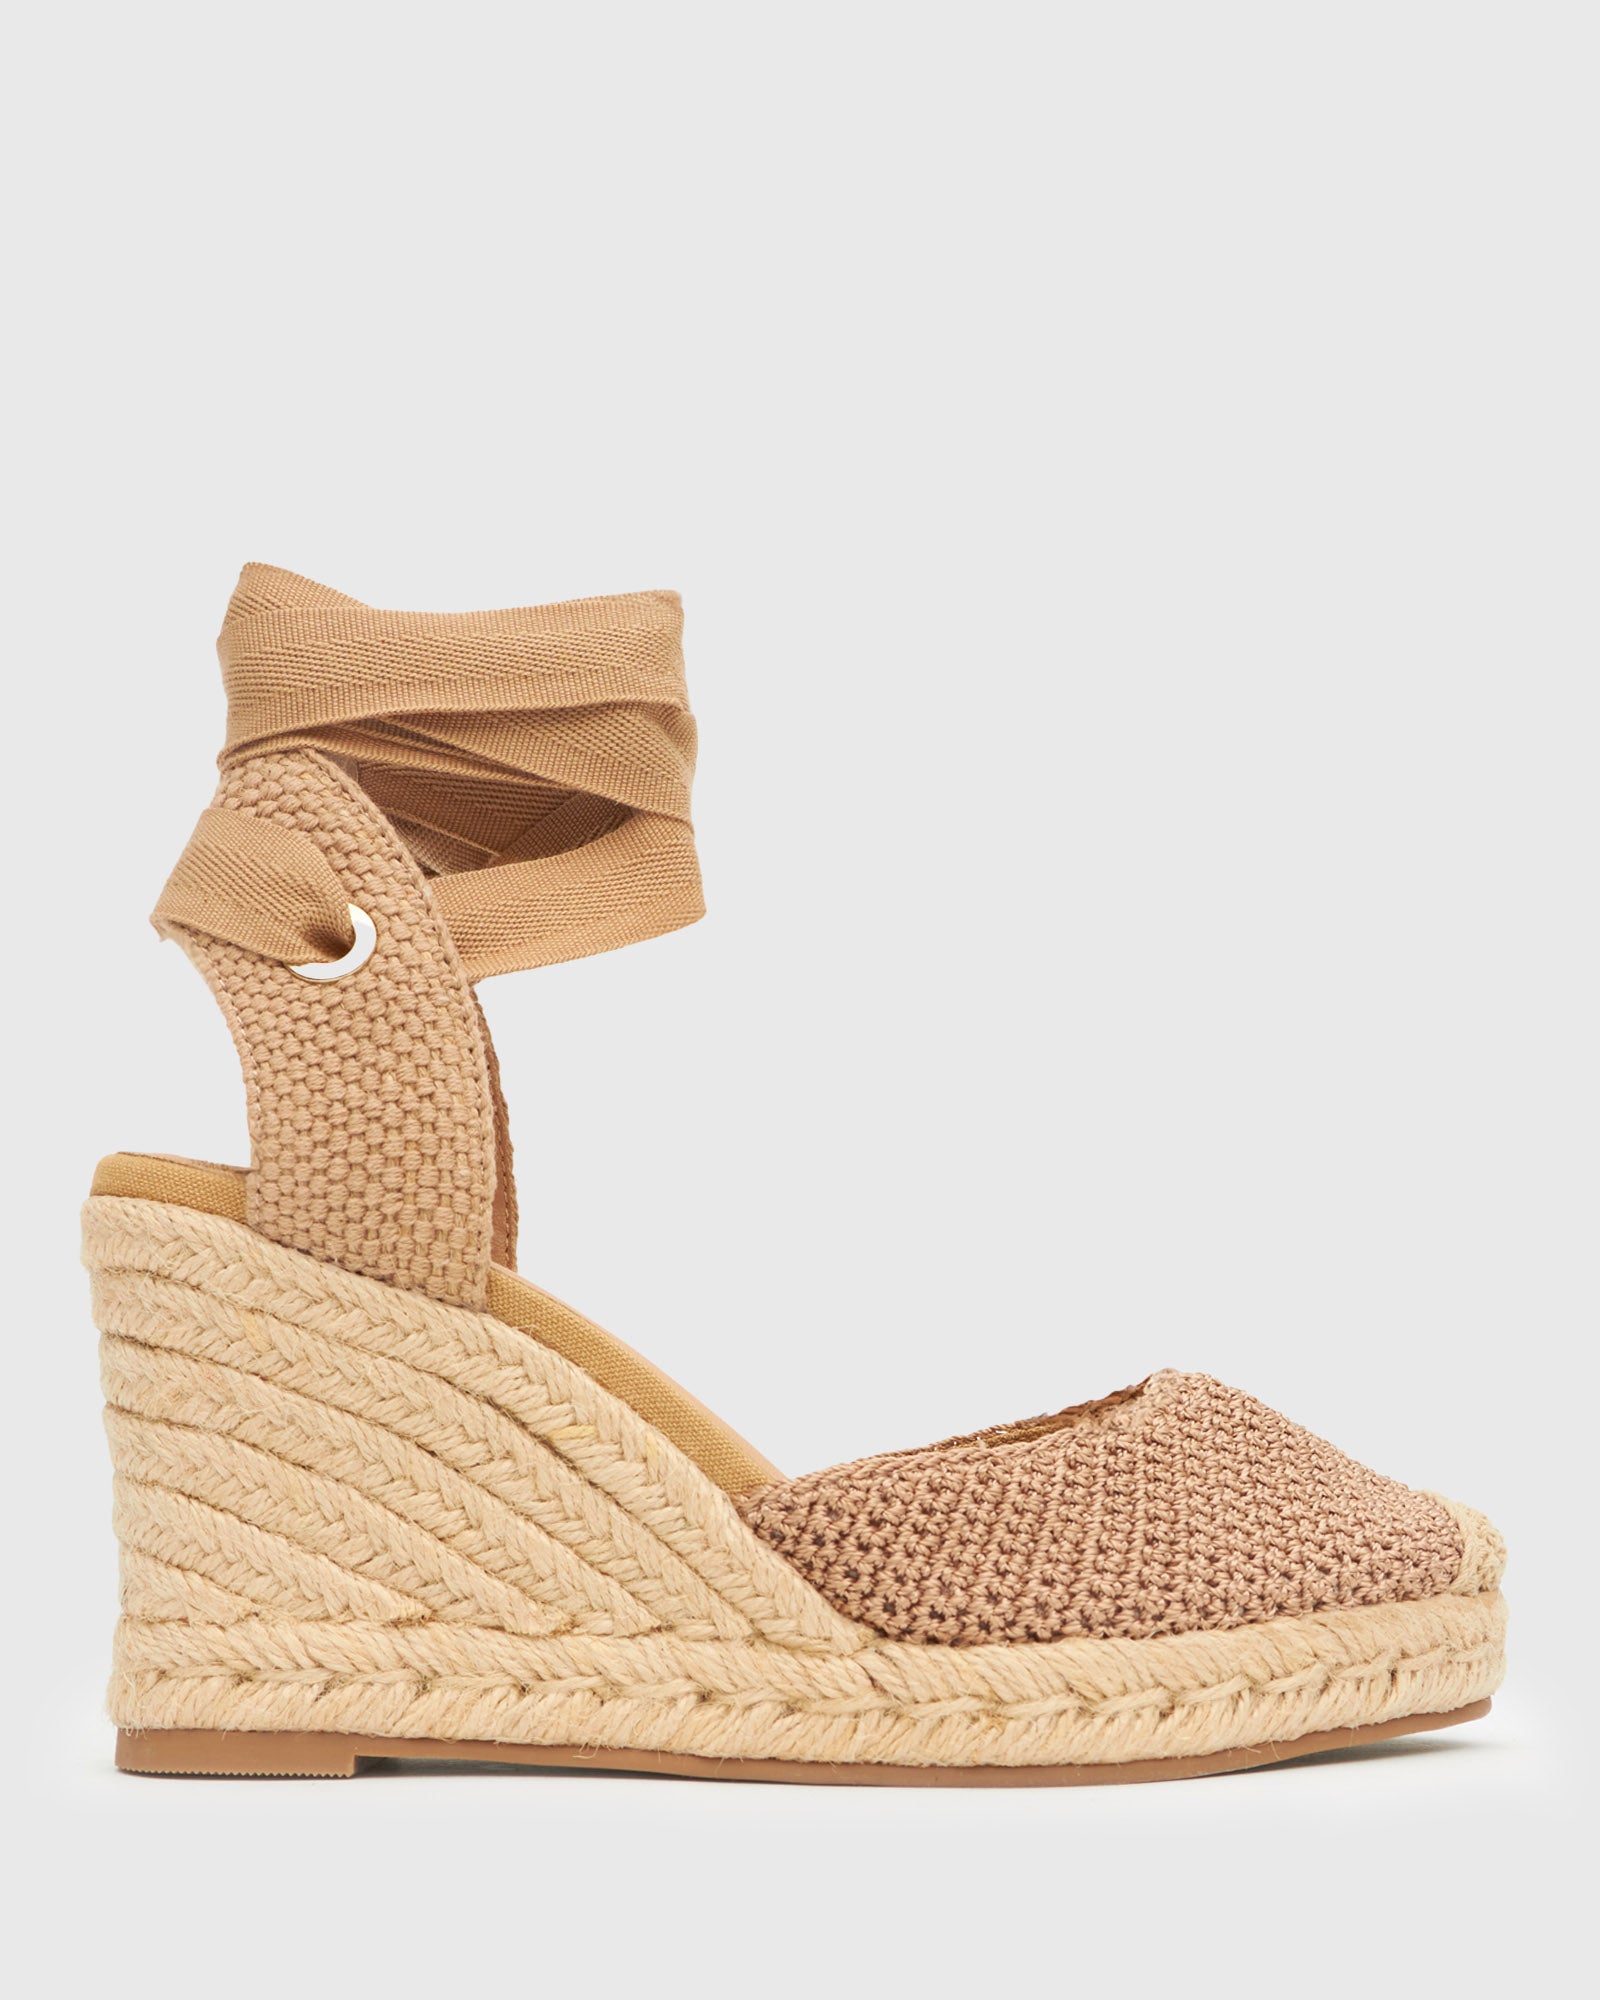 Buy ESPI Espadrille Wedge Sandals by Betts online - Betts